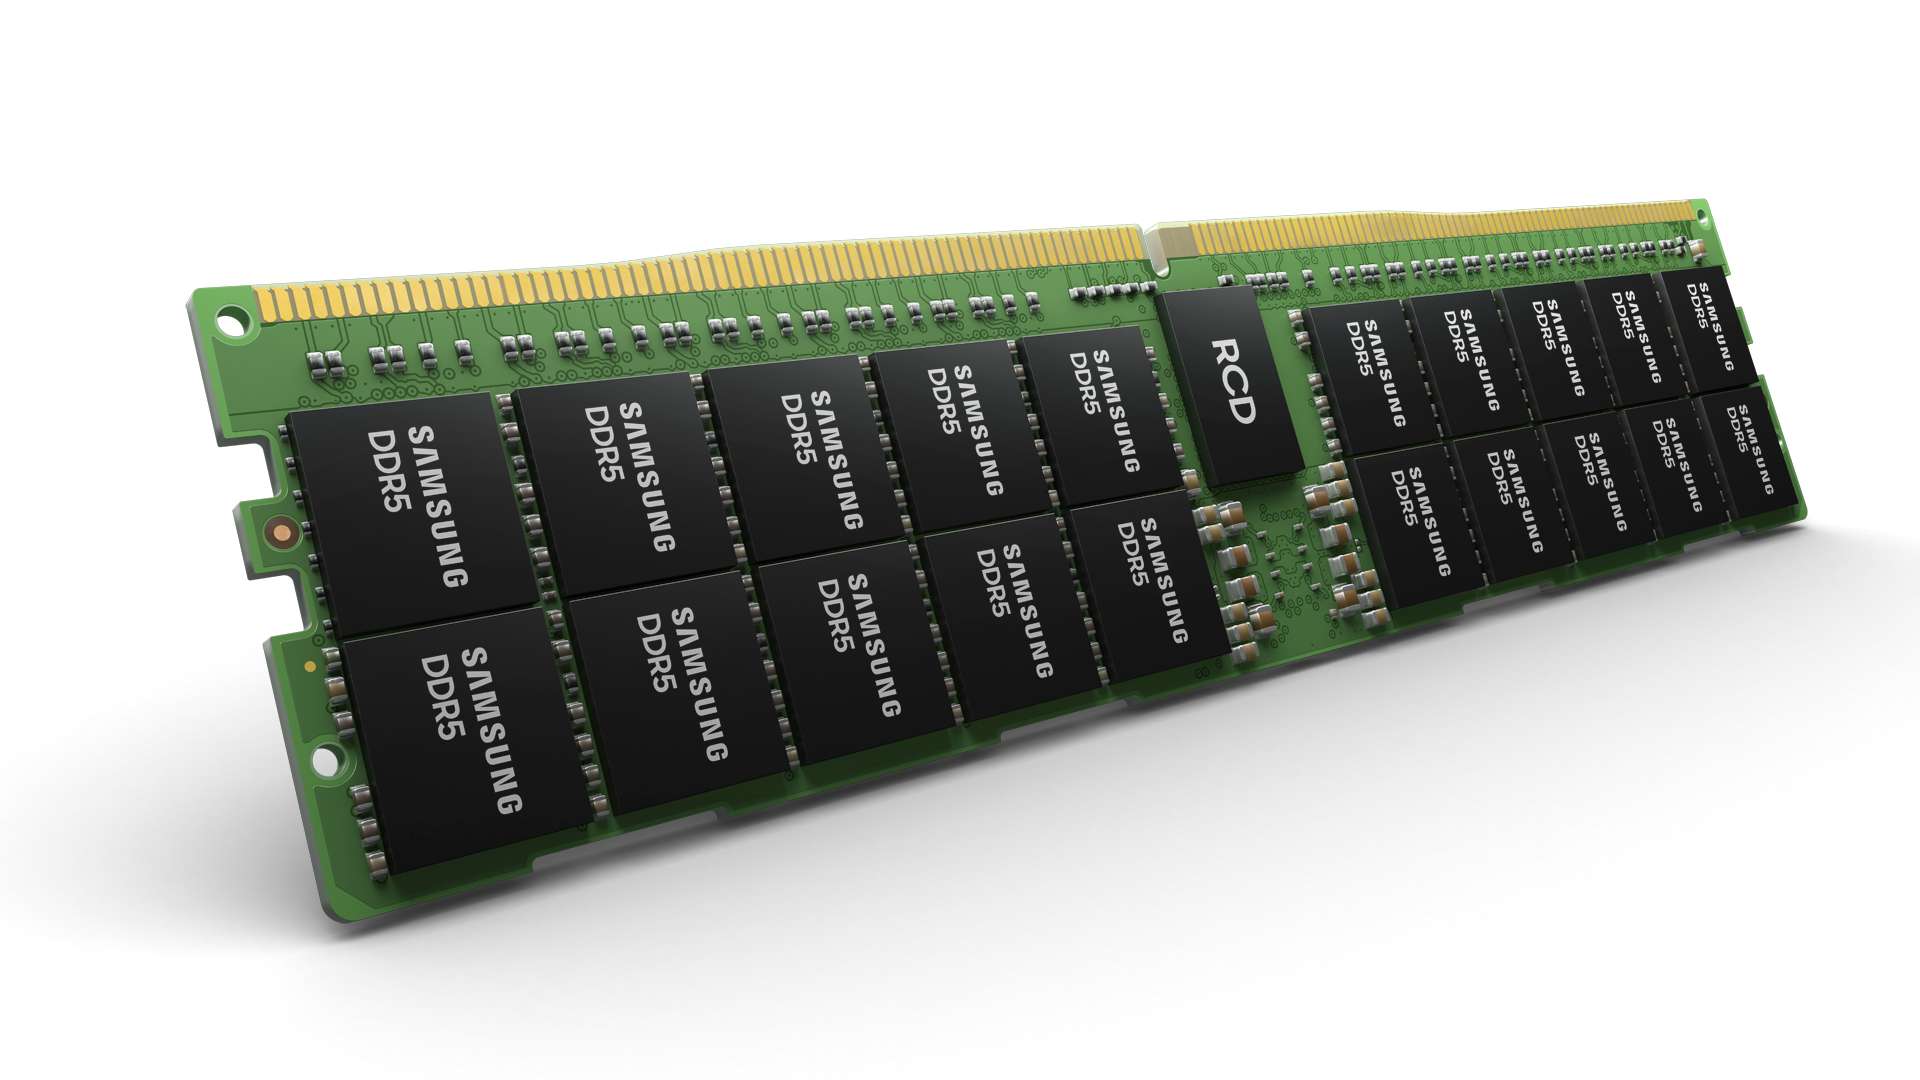 Samsung’s new DDR5 RAM chips could give single-stick capacities of up to 768GB